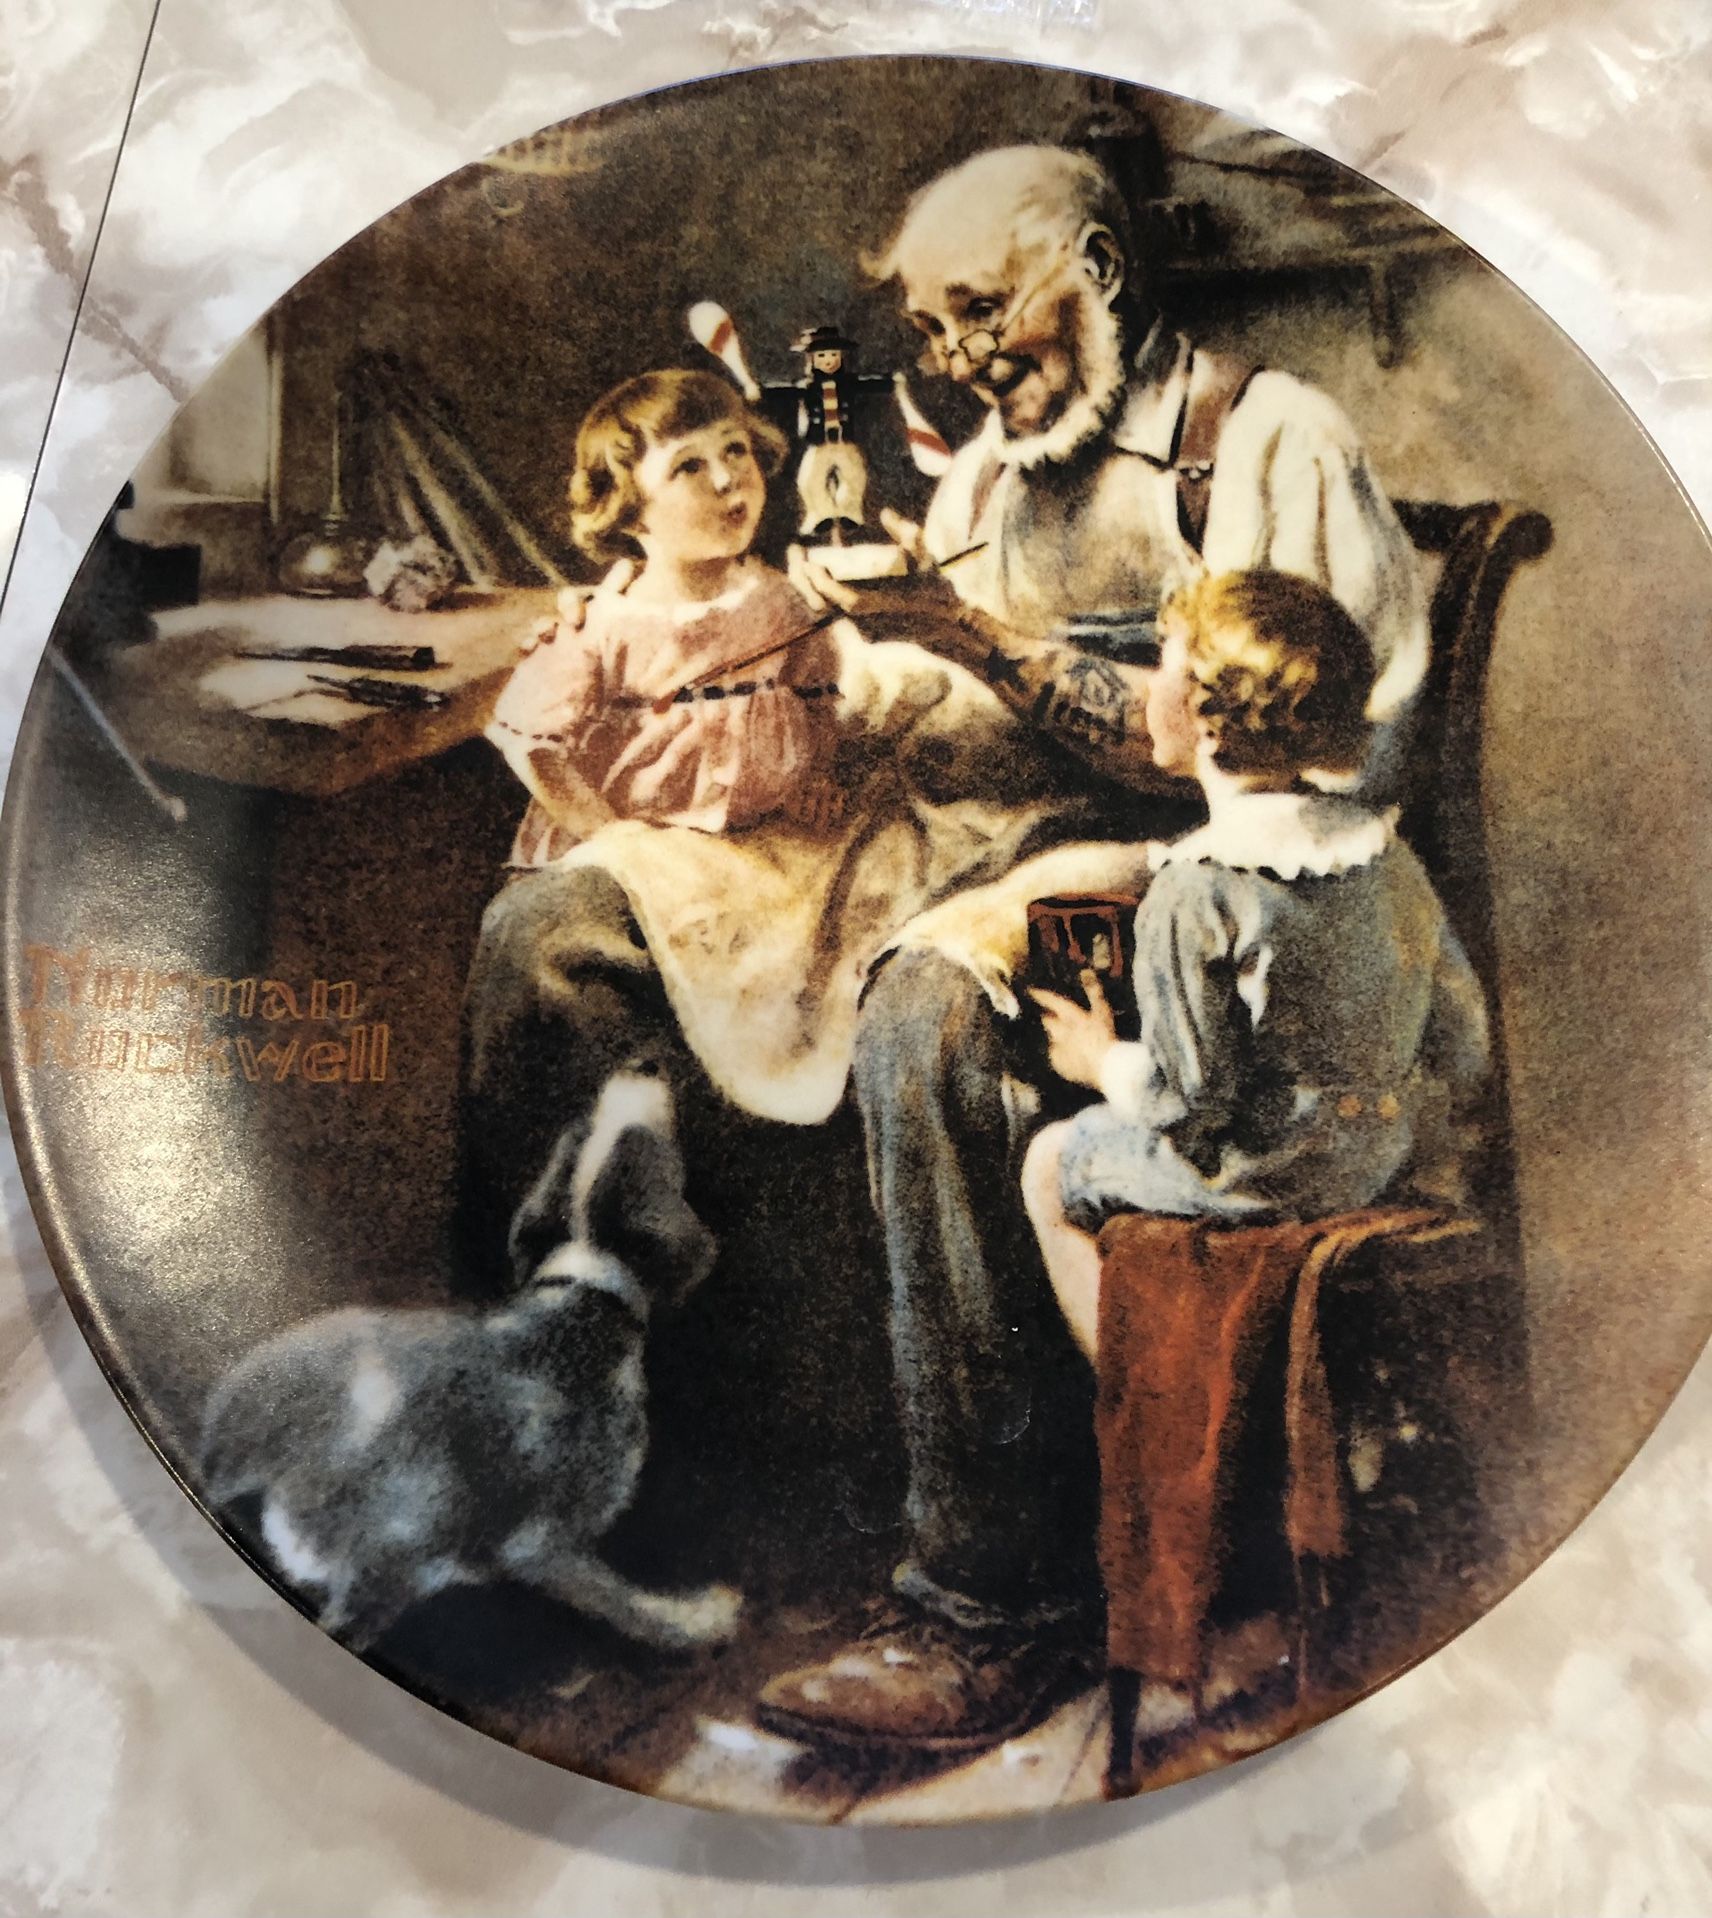 Rockwell society heritage collection plates one through 11. Plate number two “the cobbler” missing.